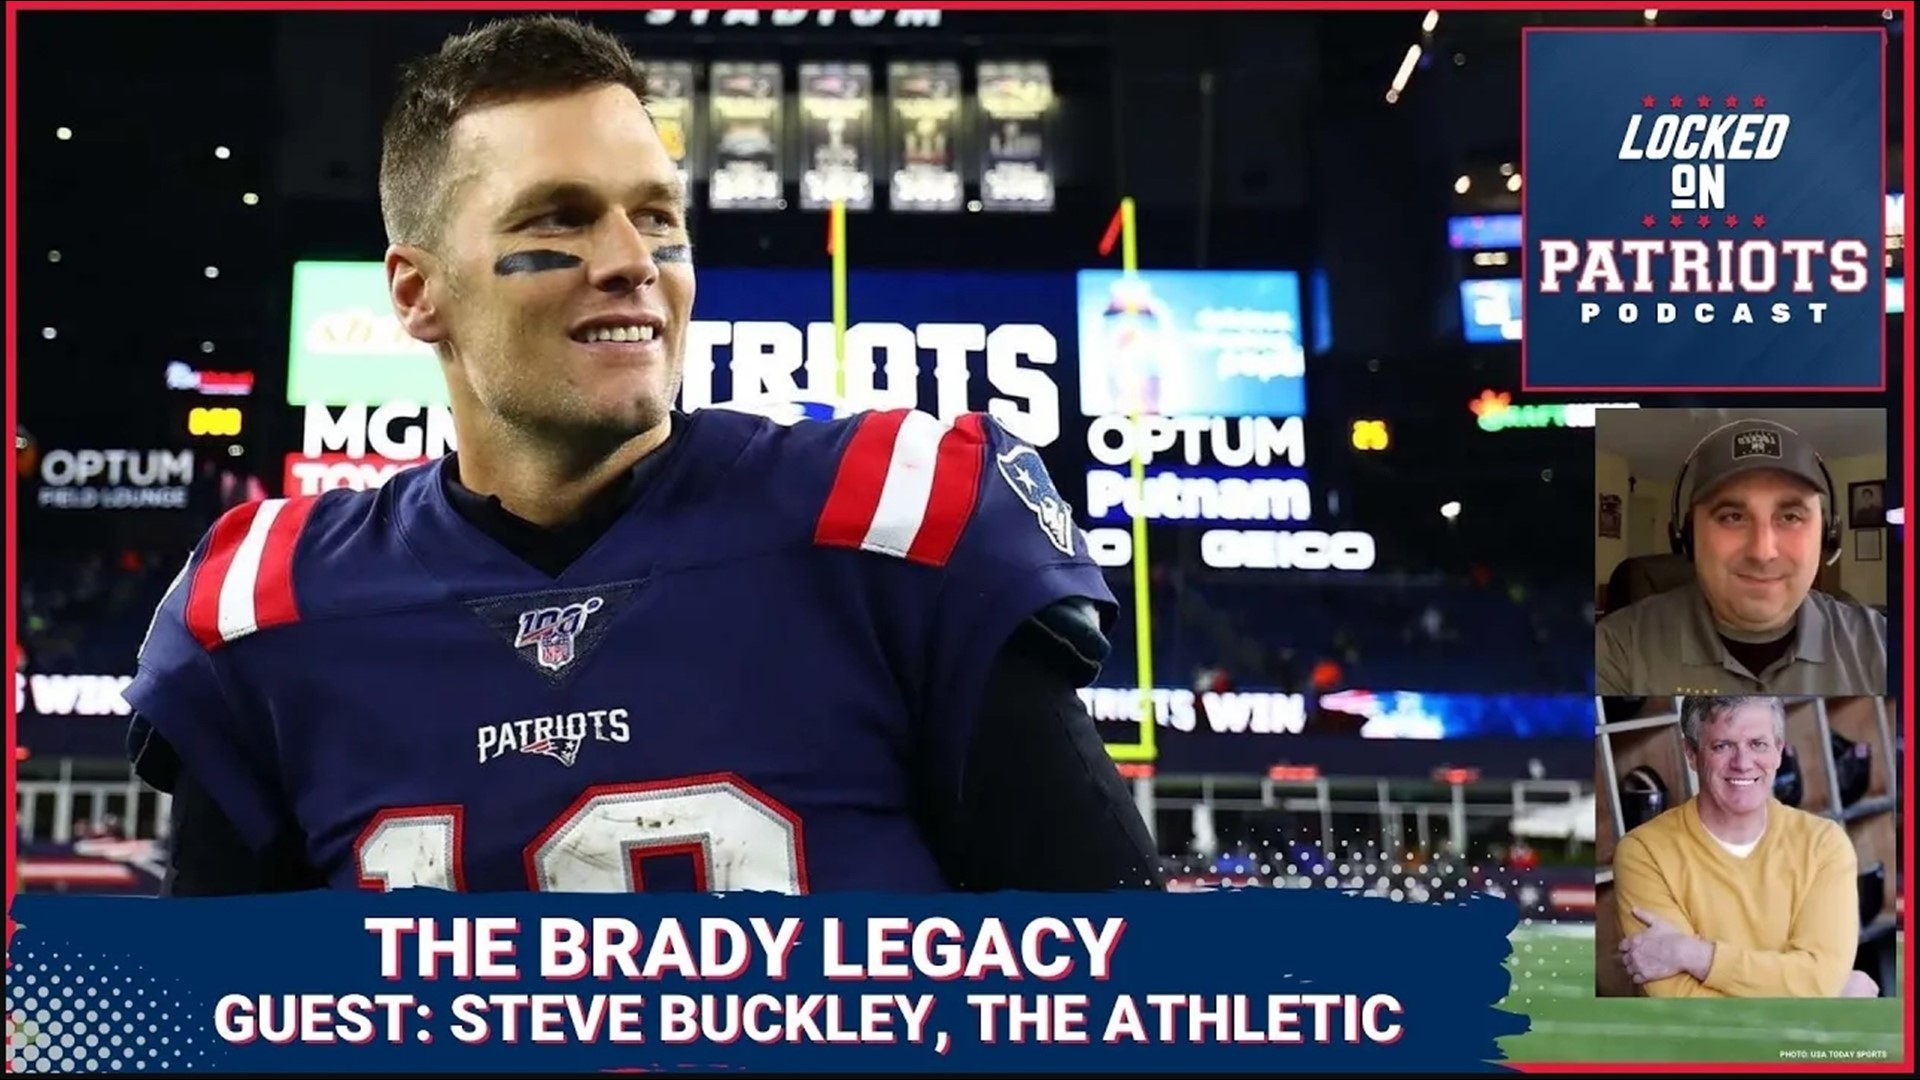 The New England Patriots and Tom Brady will forever be linked throughout sports history.